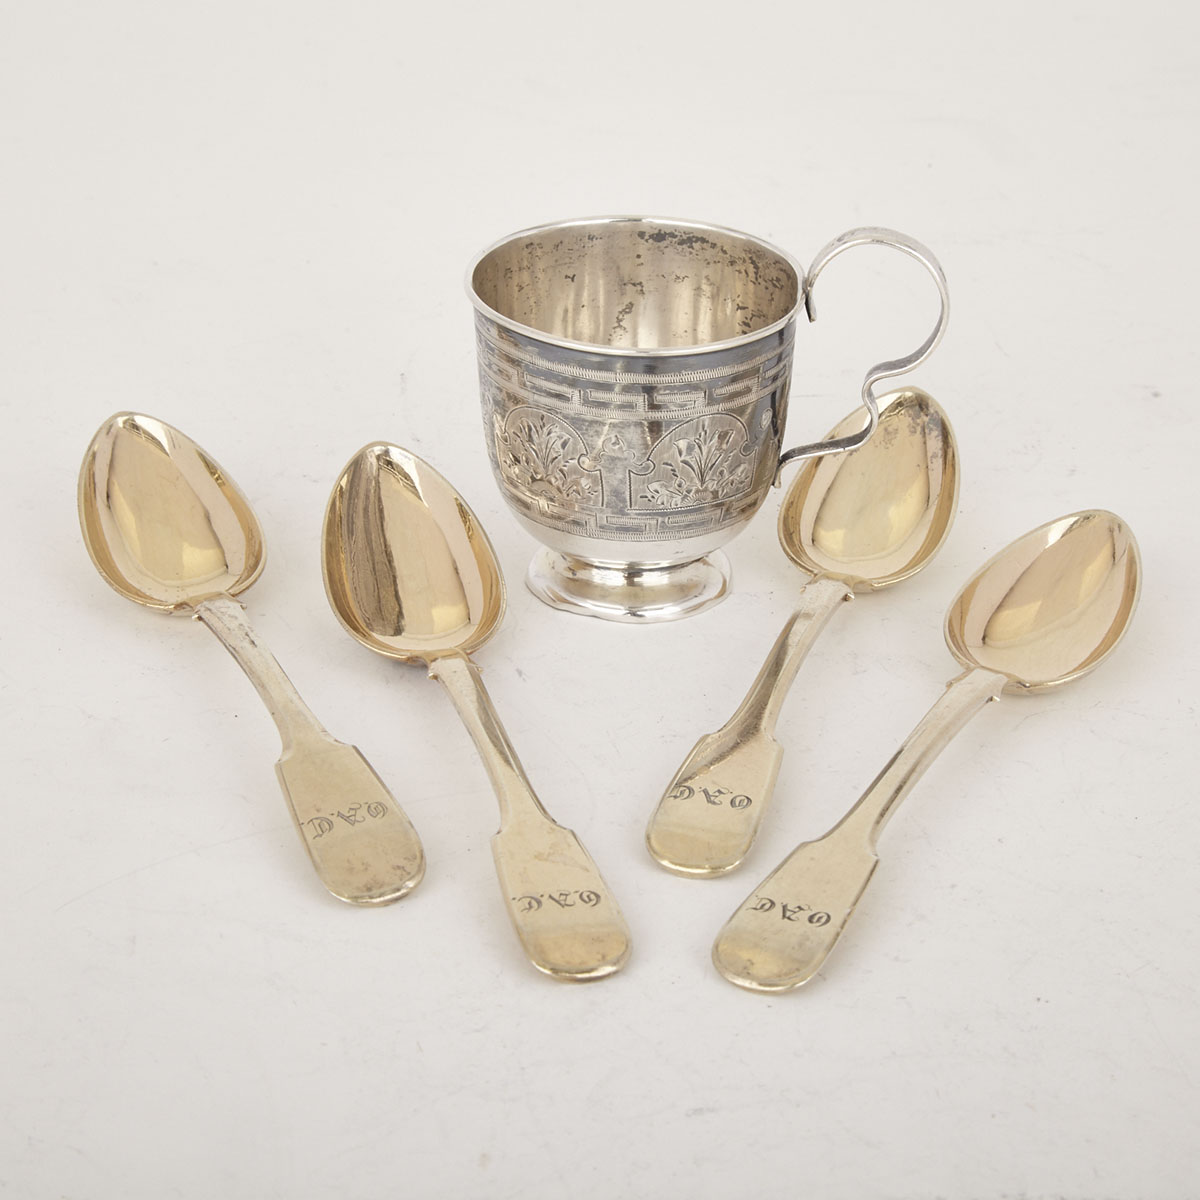 Russian Silver Small Cup, probably Moscow, 1881 and Four Silver-Gilt Fiddle Pattern Tea Spoons, St. Petersburg, 1847